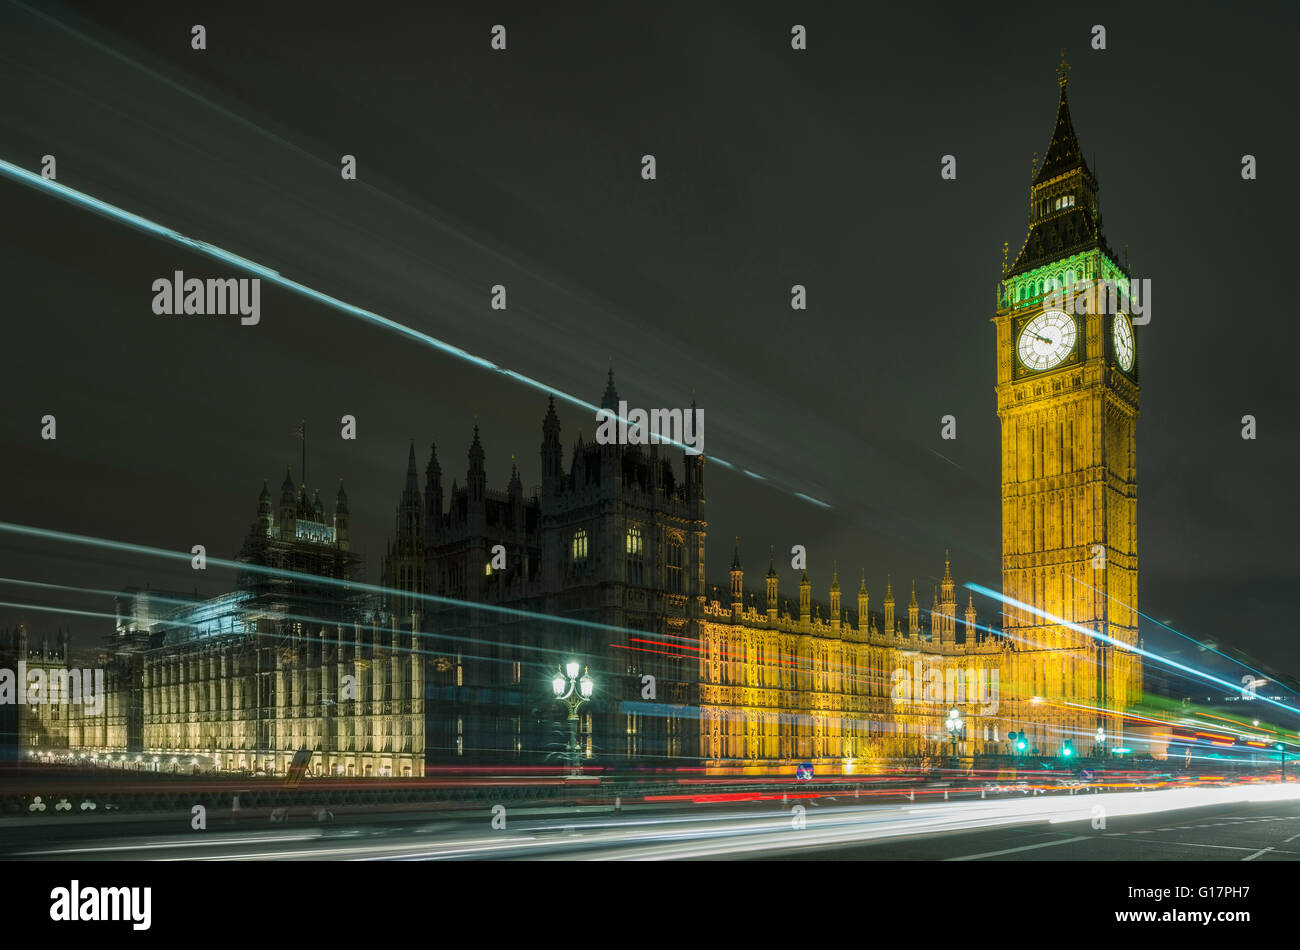 Traffic light trails passing Westminster Palace and Big Ben at night, London, UK Stock Photo